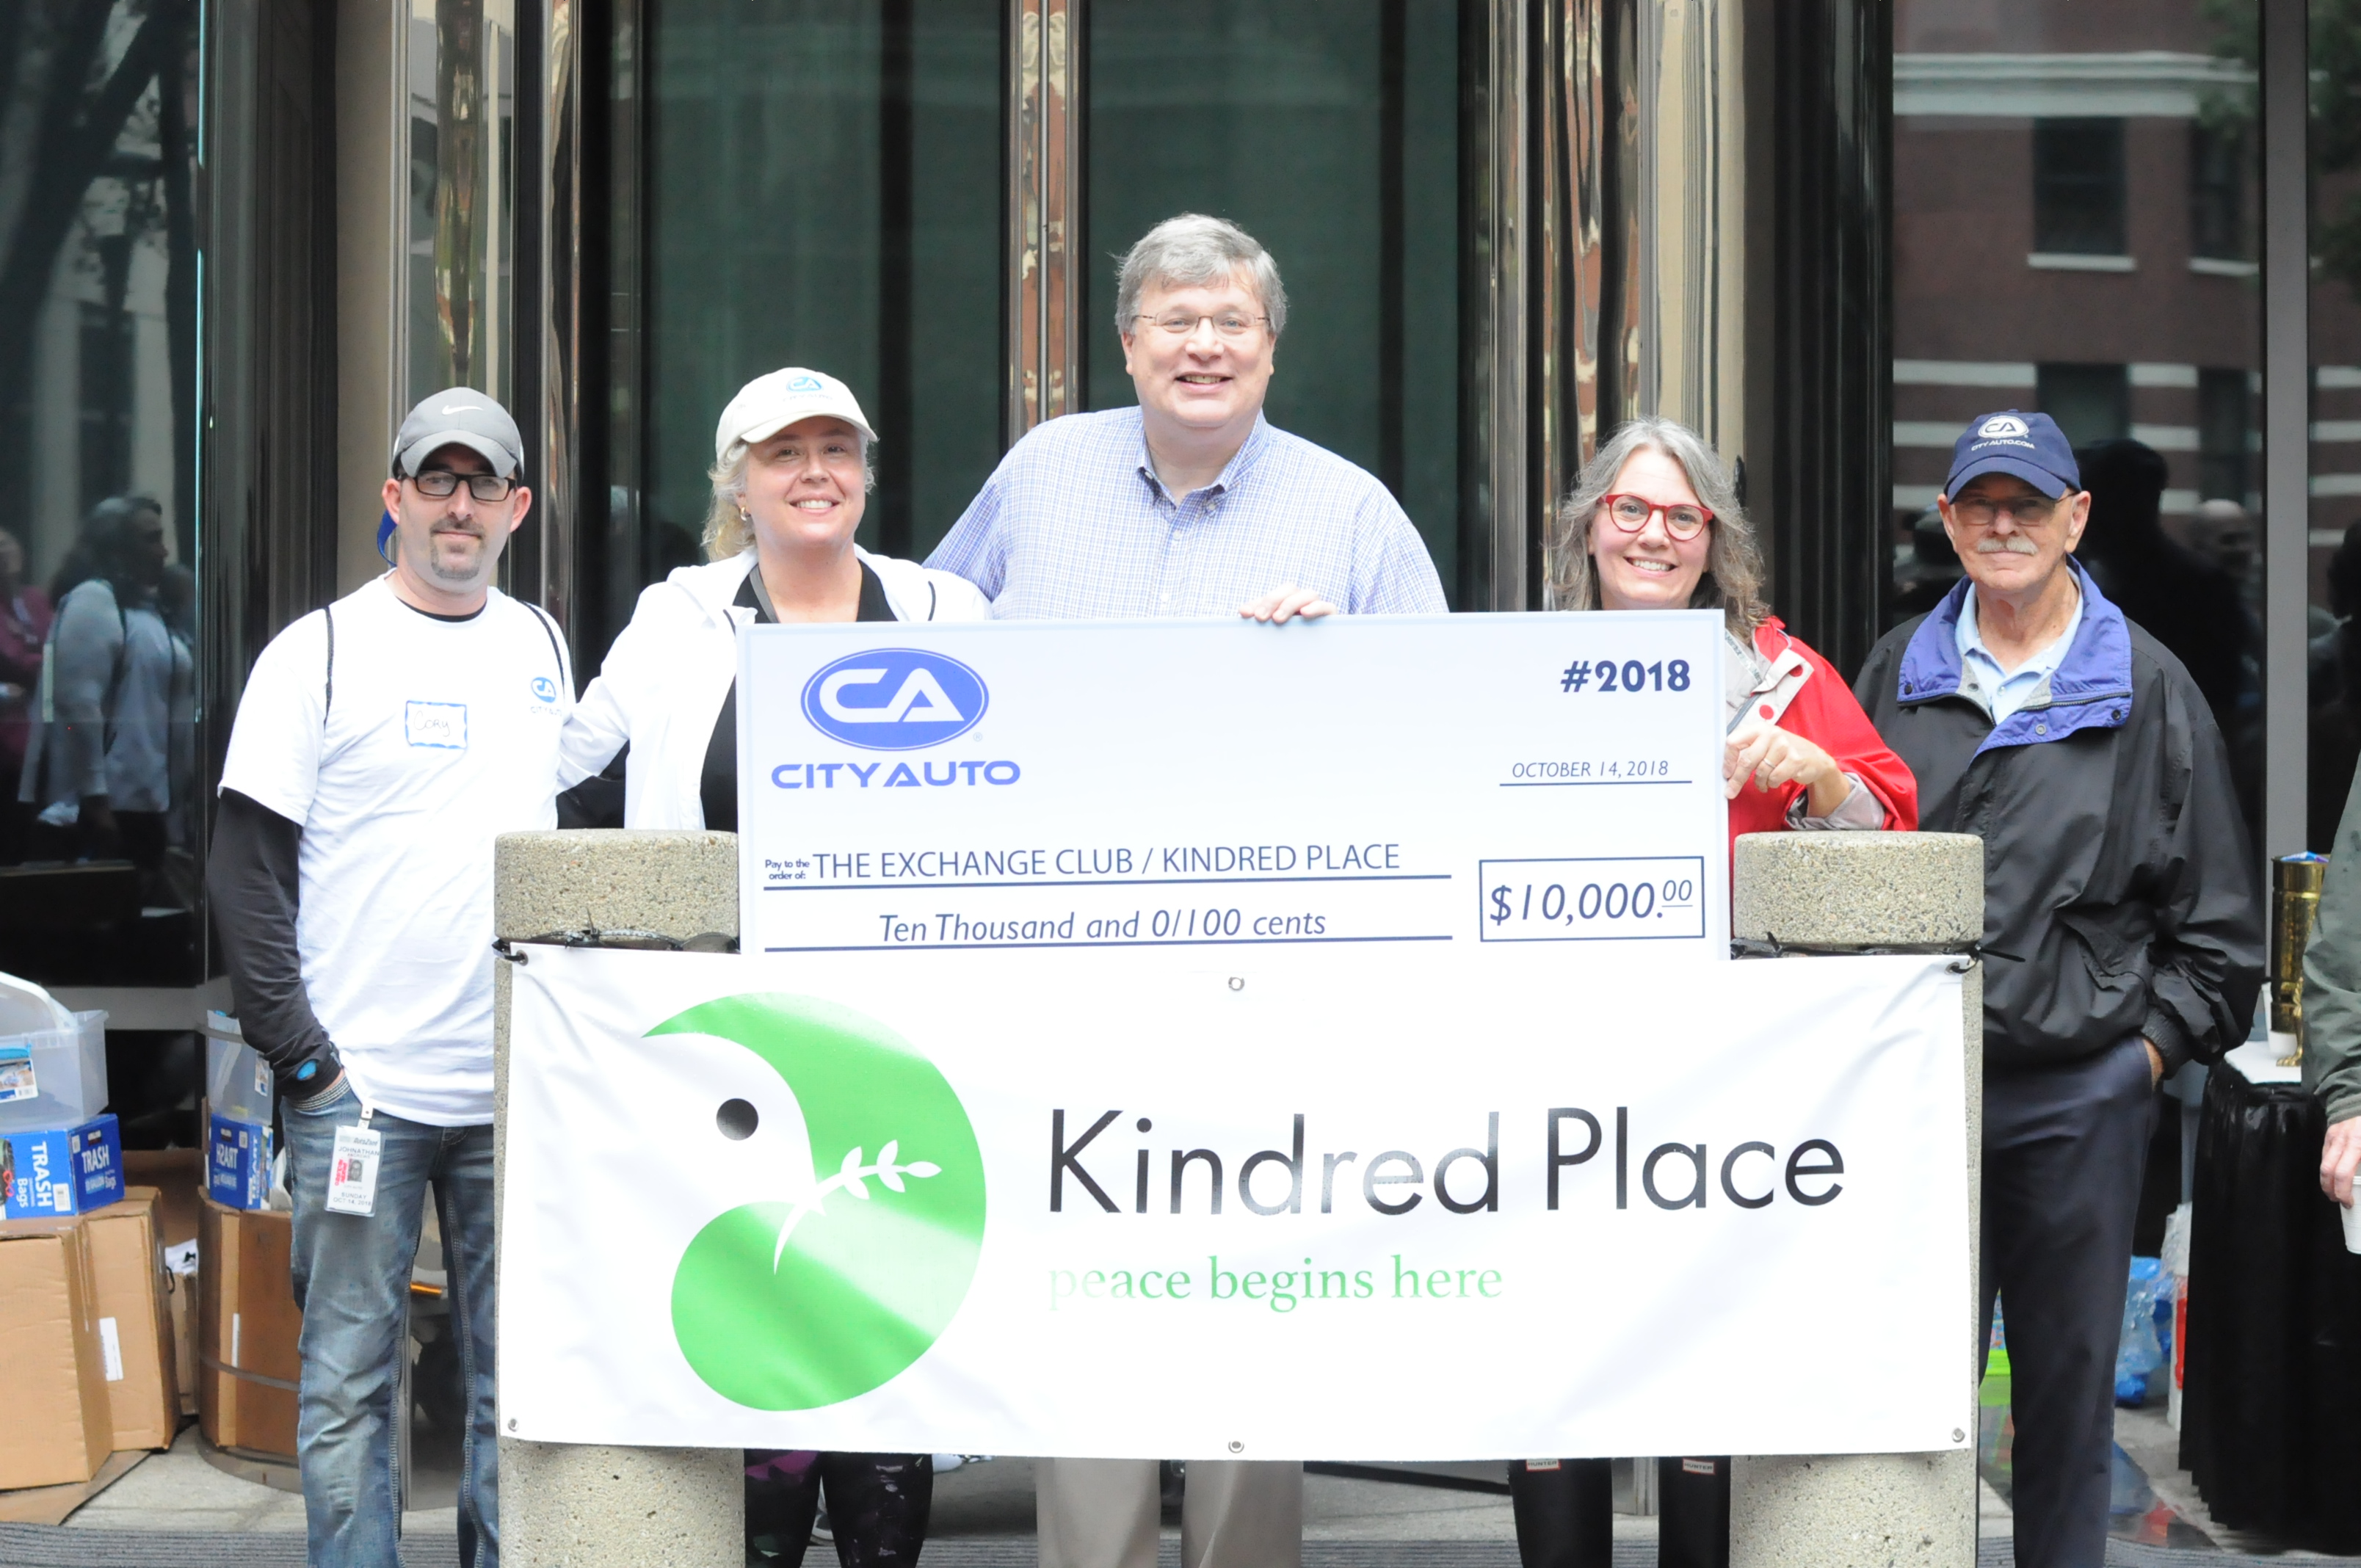 Mayor Jim Strickland designated Oct. 14 as “Kindred Community Day” to kick off the rebranding of The Exchange Club Family Center. (Kindred Place)